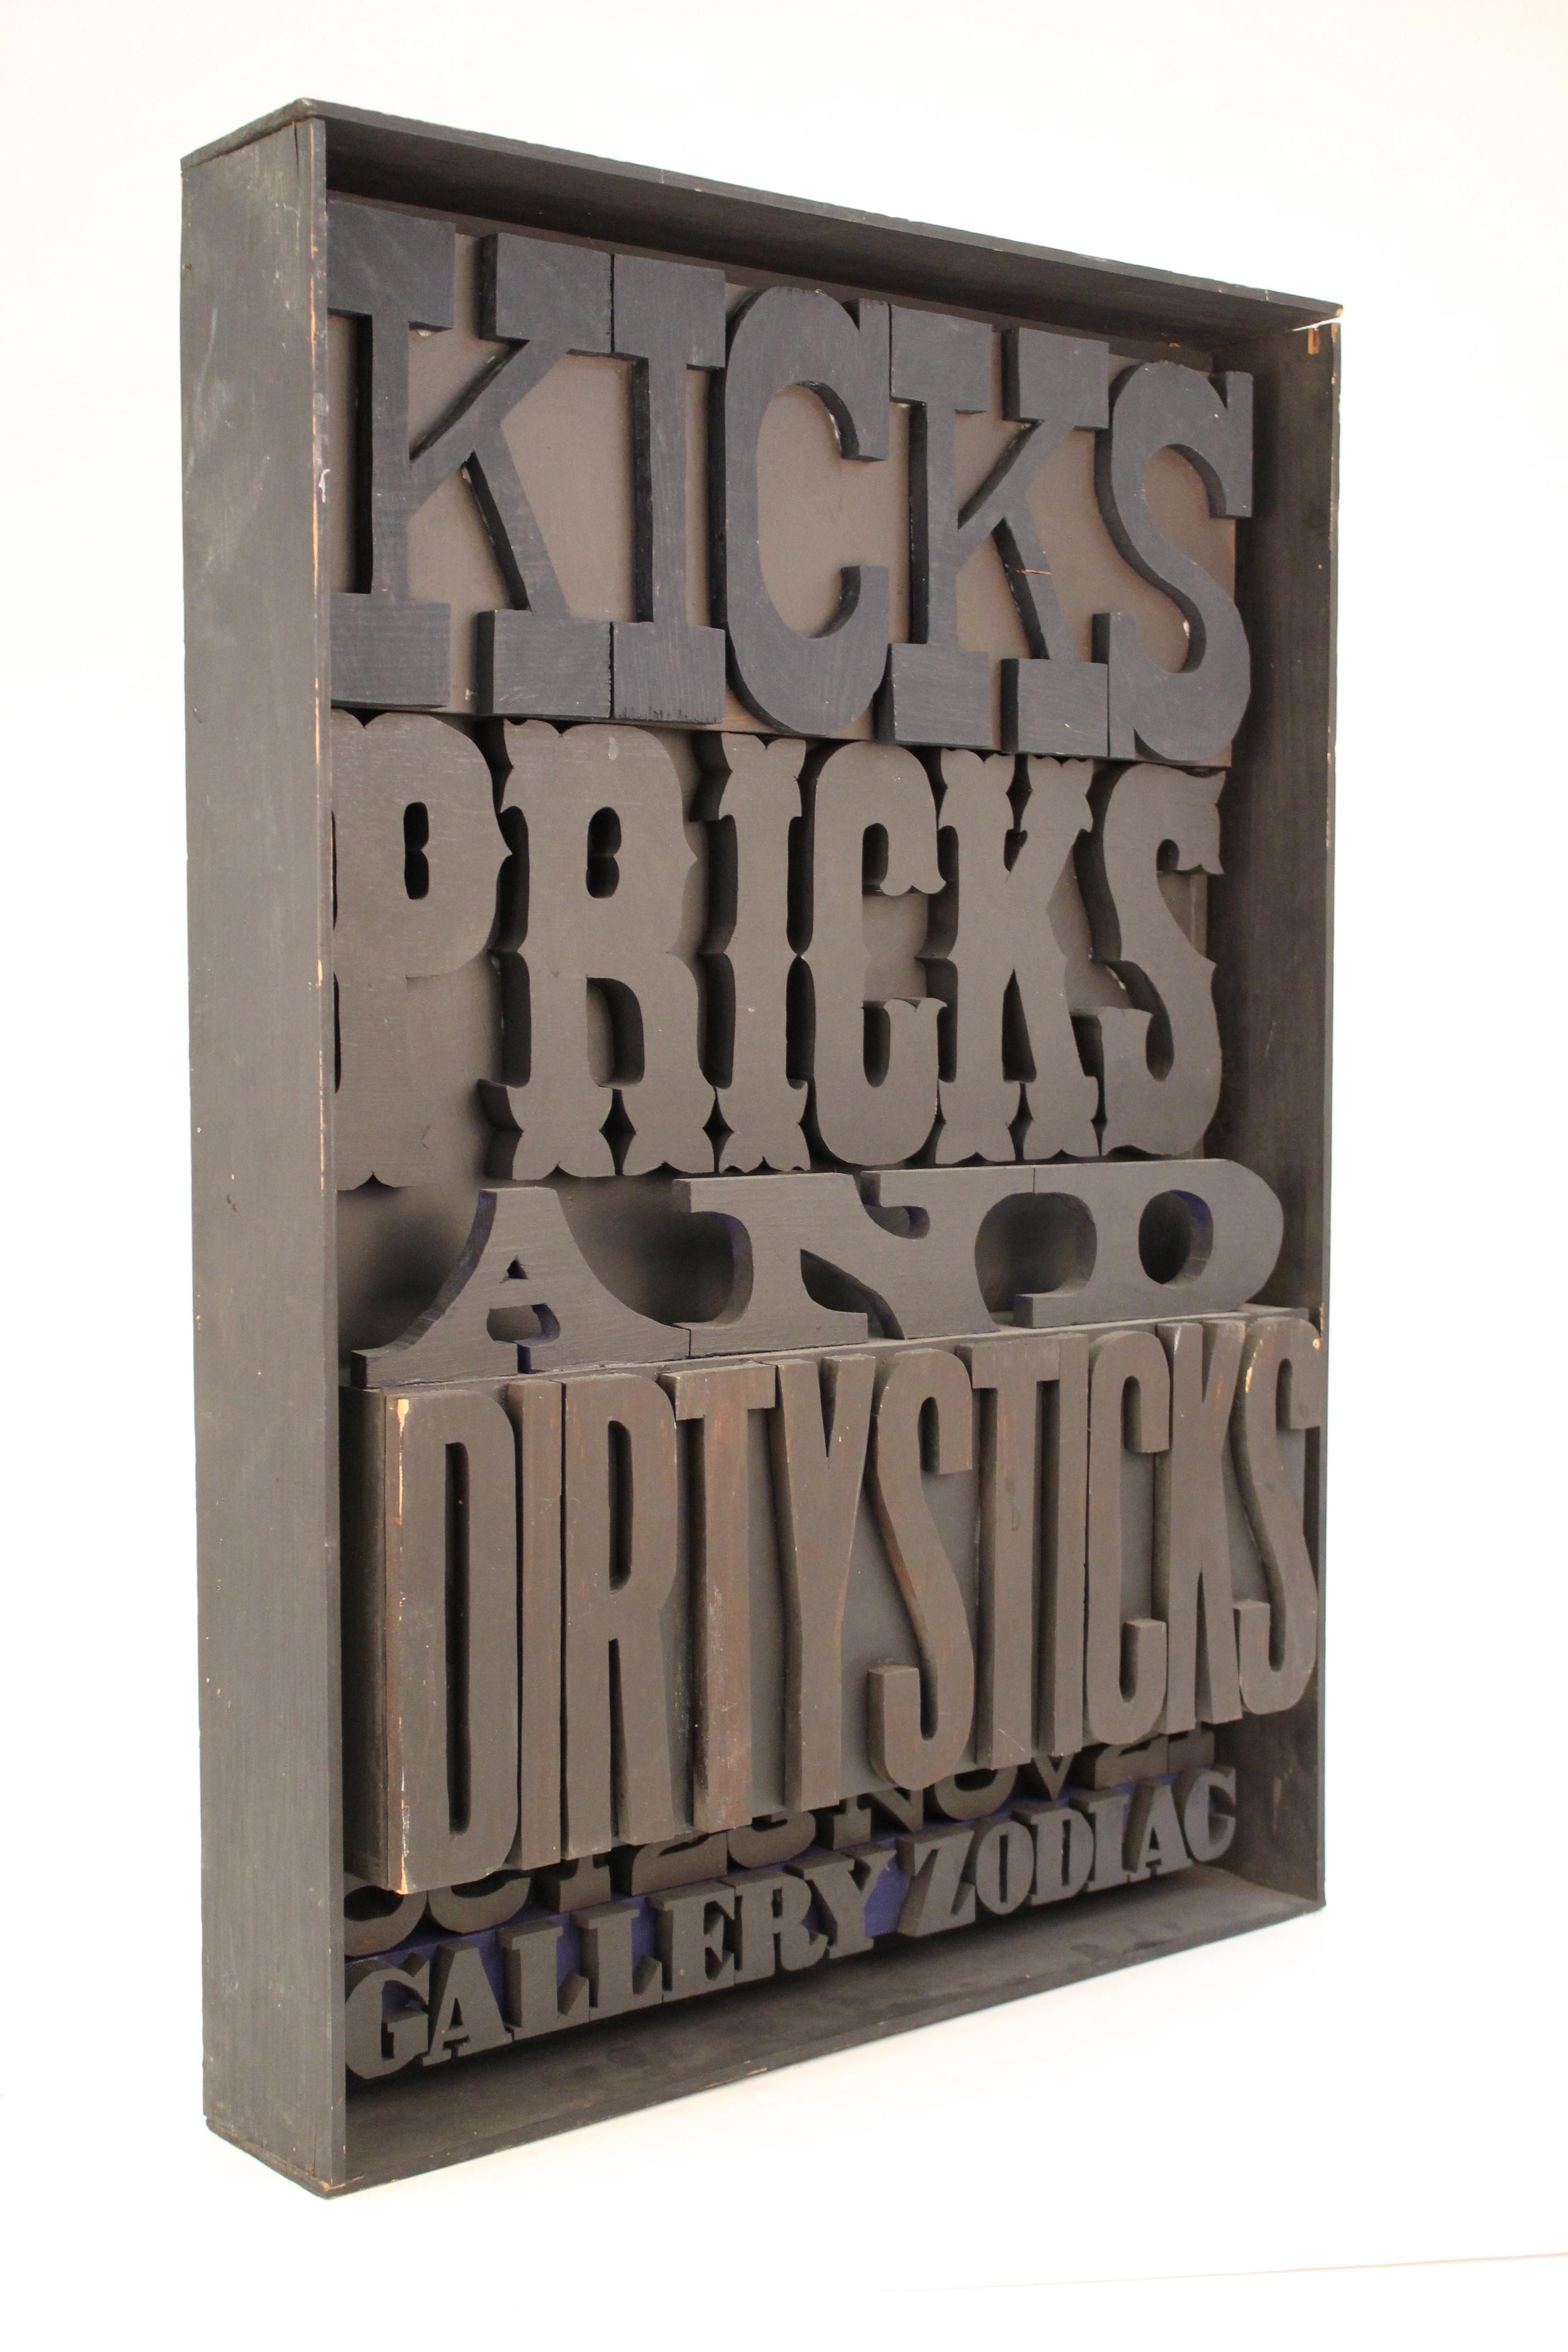 Gallery Zodiac wooden sign constructed in sculpted and cut out wooden lettering inside a box, made by James Russell. The piece spells out 'Kicks Pricks and Dirtysticks - Oct 23Nov 21 - Gallery Zodiac' and has a label on the backside. In good vintage